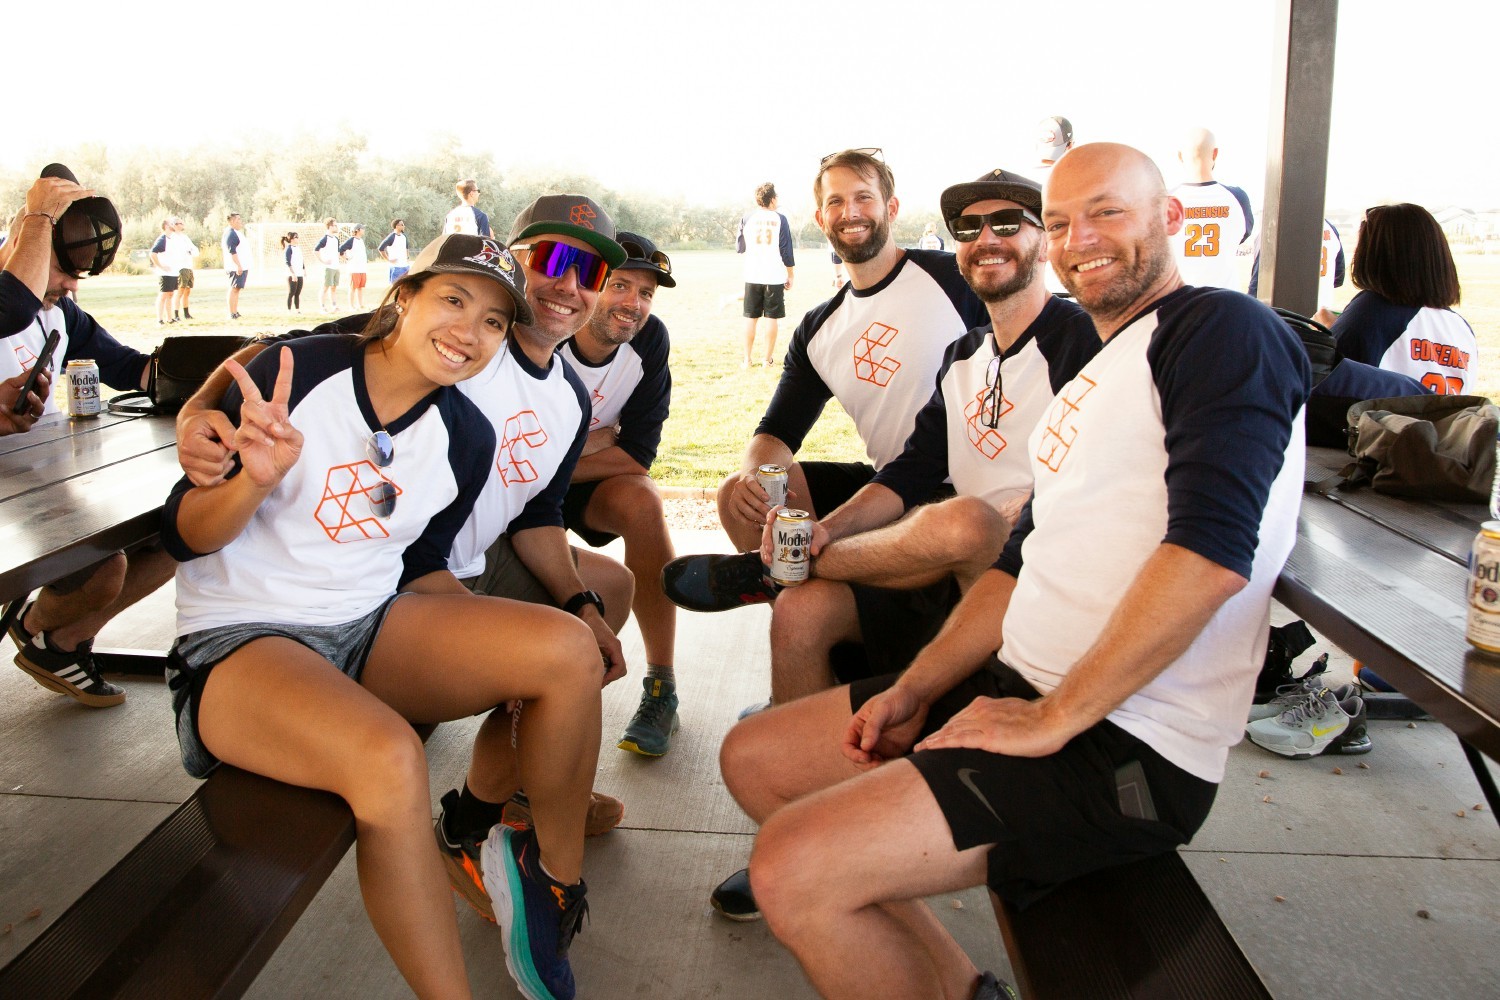 Some of our Engineering and Product team members relaxing between rounds during our Consensus Kickball Tournament.